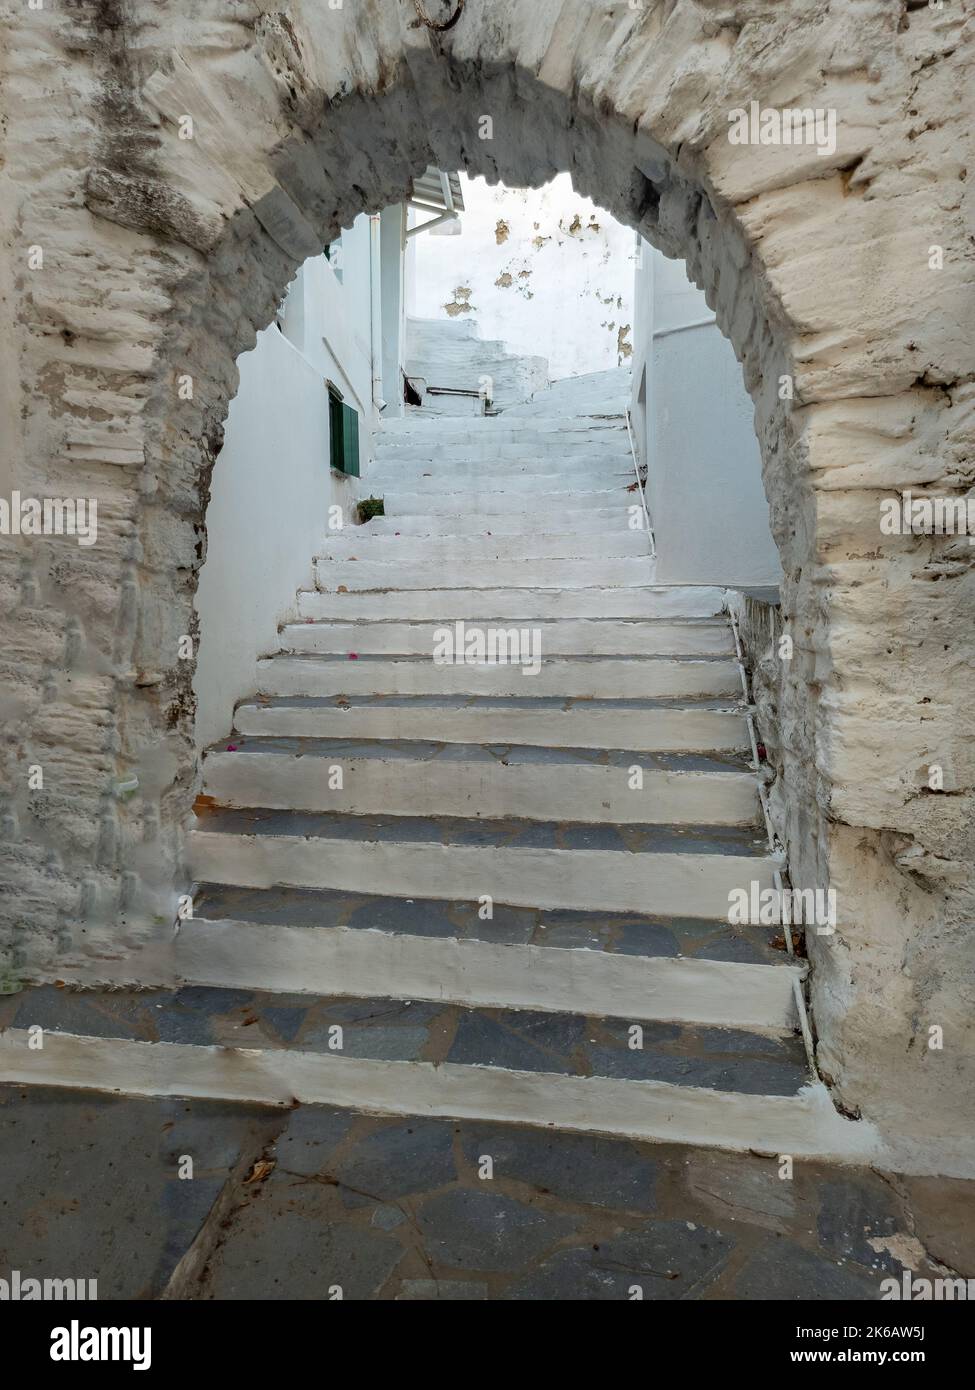 Greece, Tinos island, Cyclades. Arched stonewall entrance in front of stone paved stairs with white risers between whitewashed houses. Vertical Stock Photo